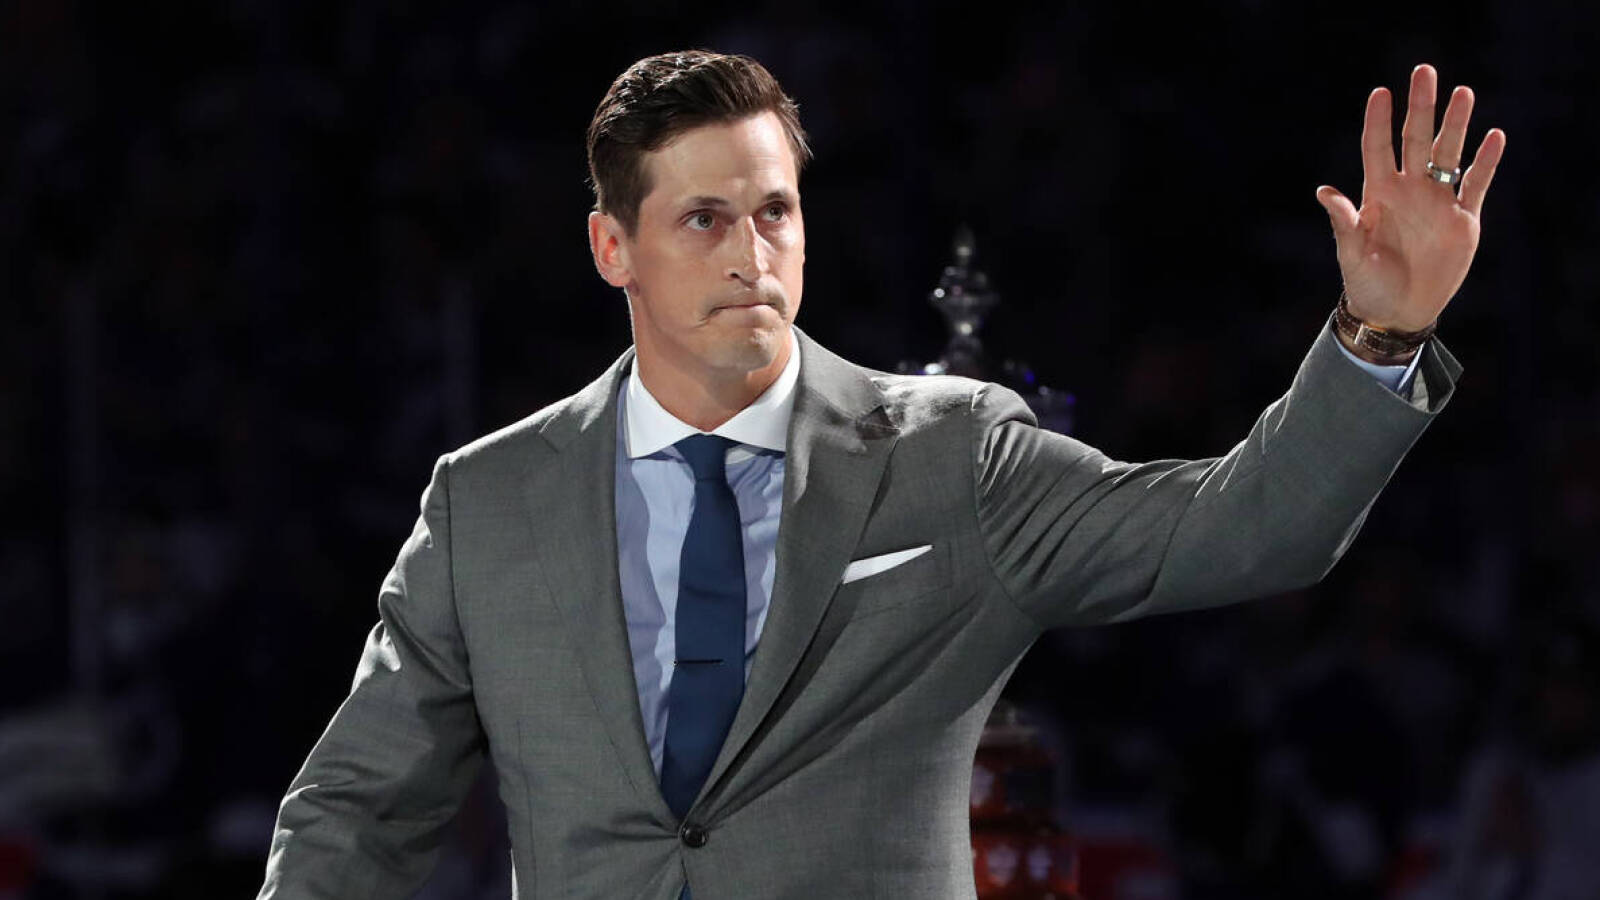 Who is Vincent Lecavalier Dating Now? A Look at His Past and